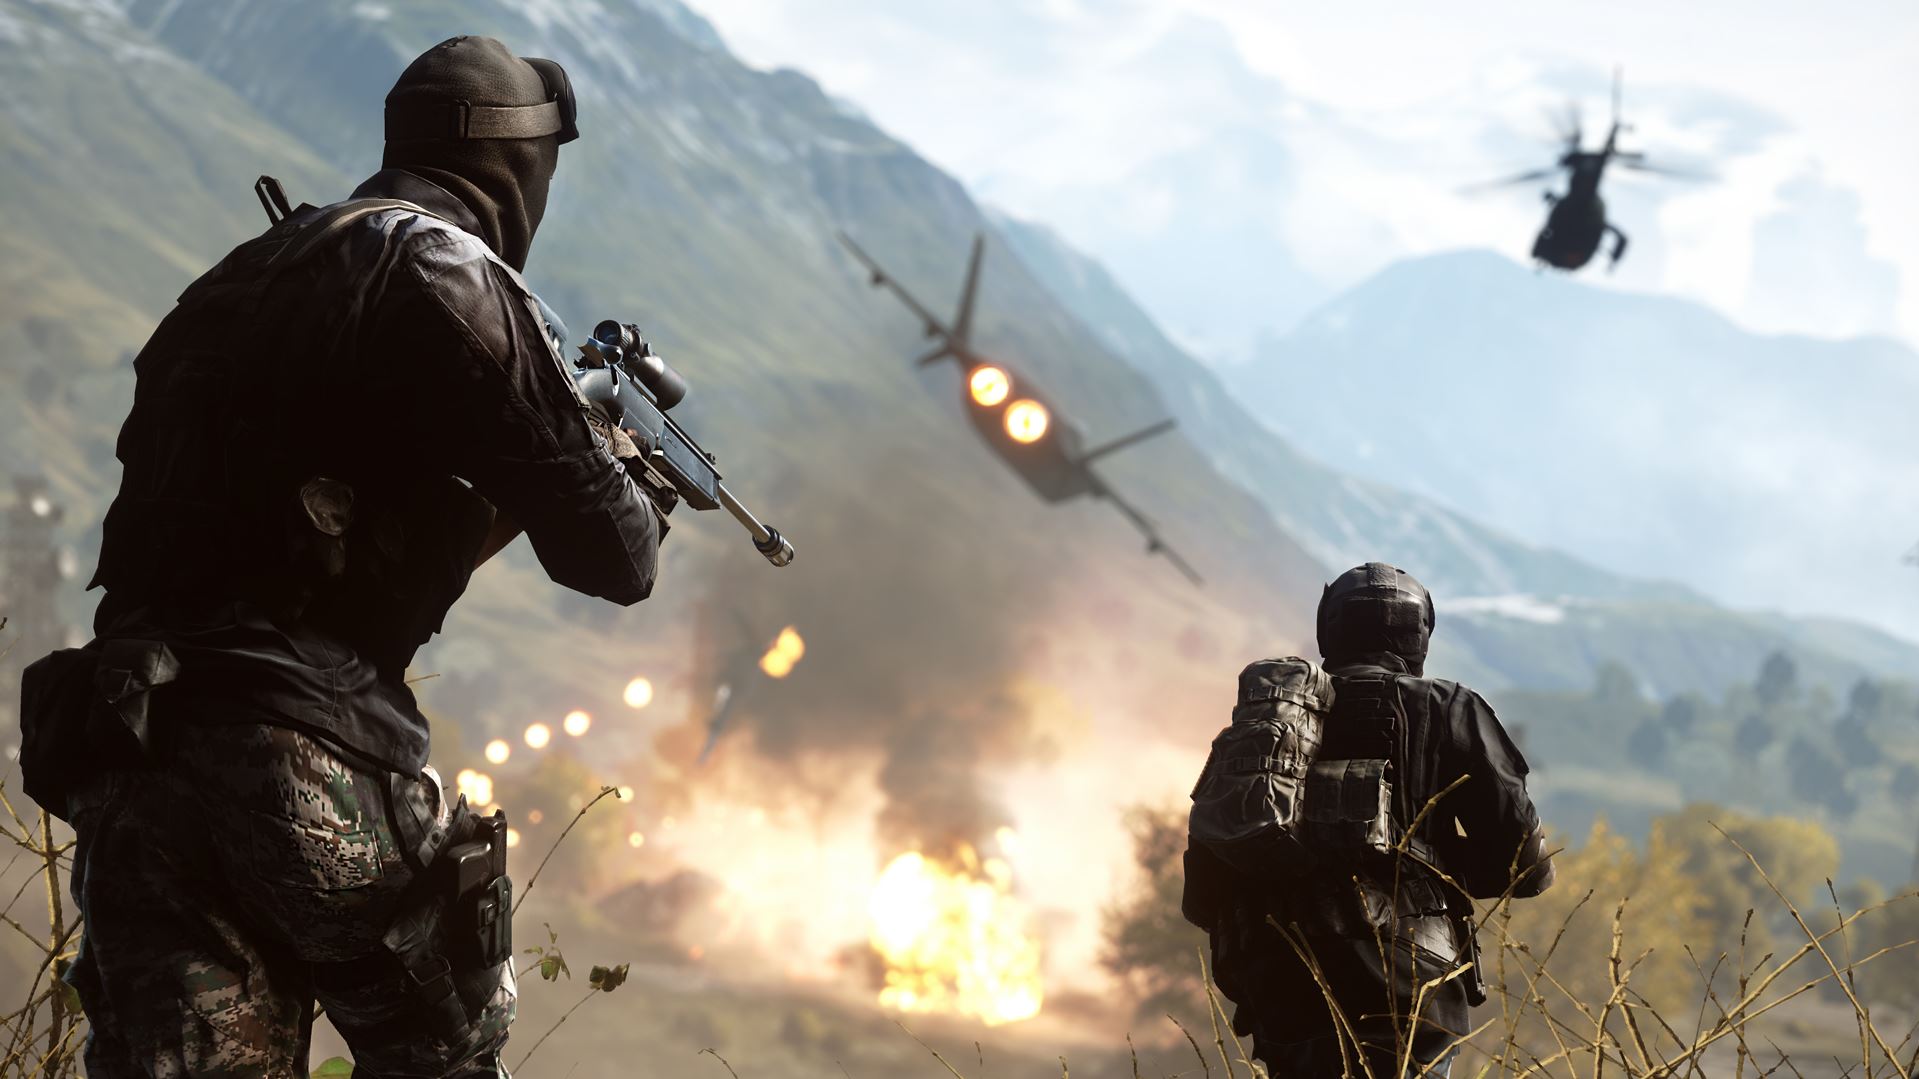 More Battlefield 6 Leaks Surface Ahead of Reveal, Release Date Too